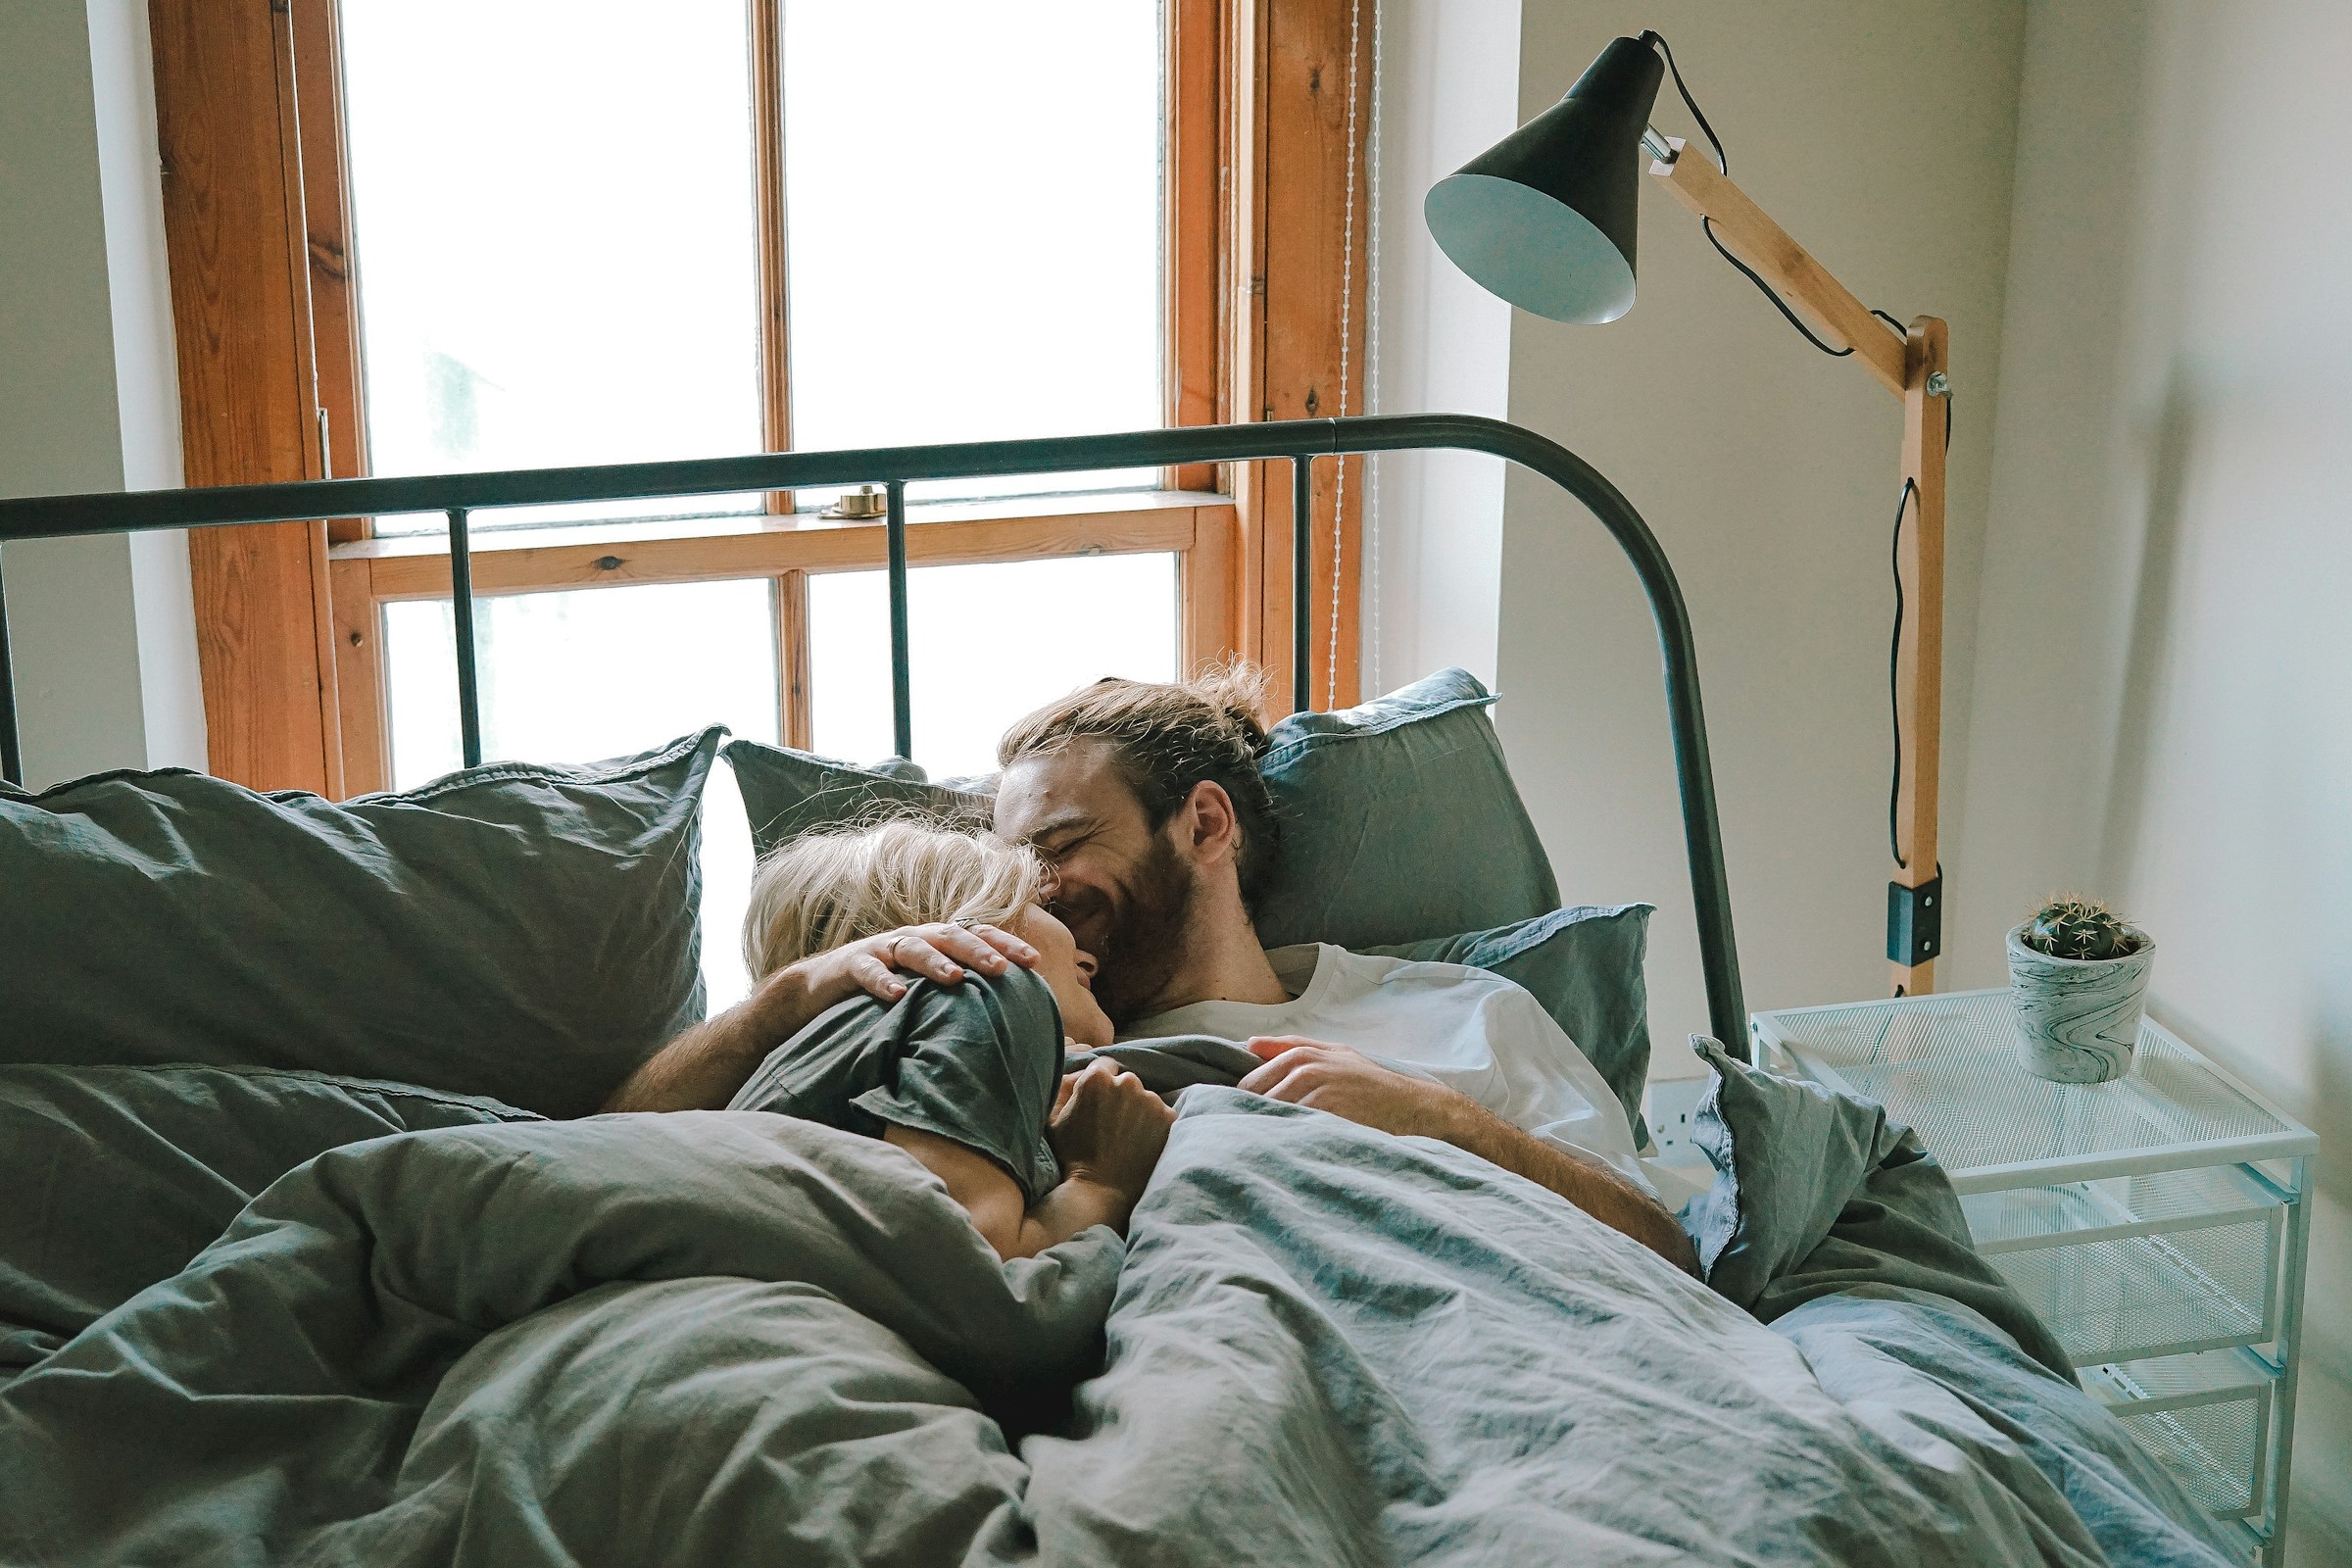 A couple in bed | Source: Unsplash